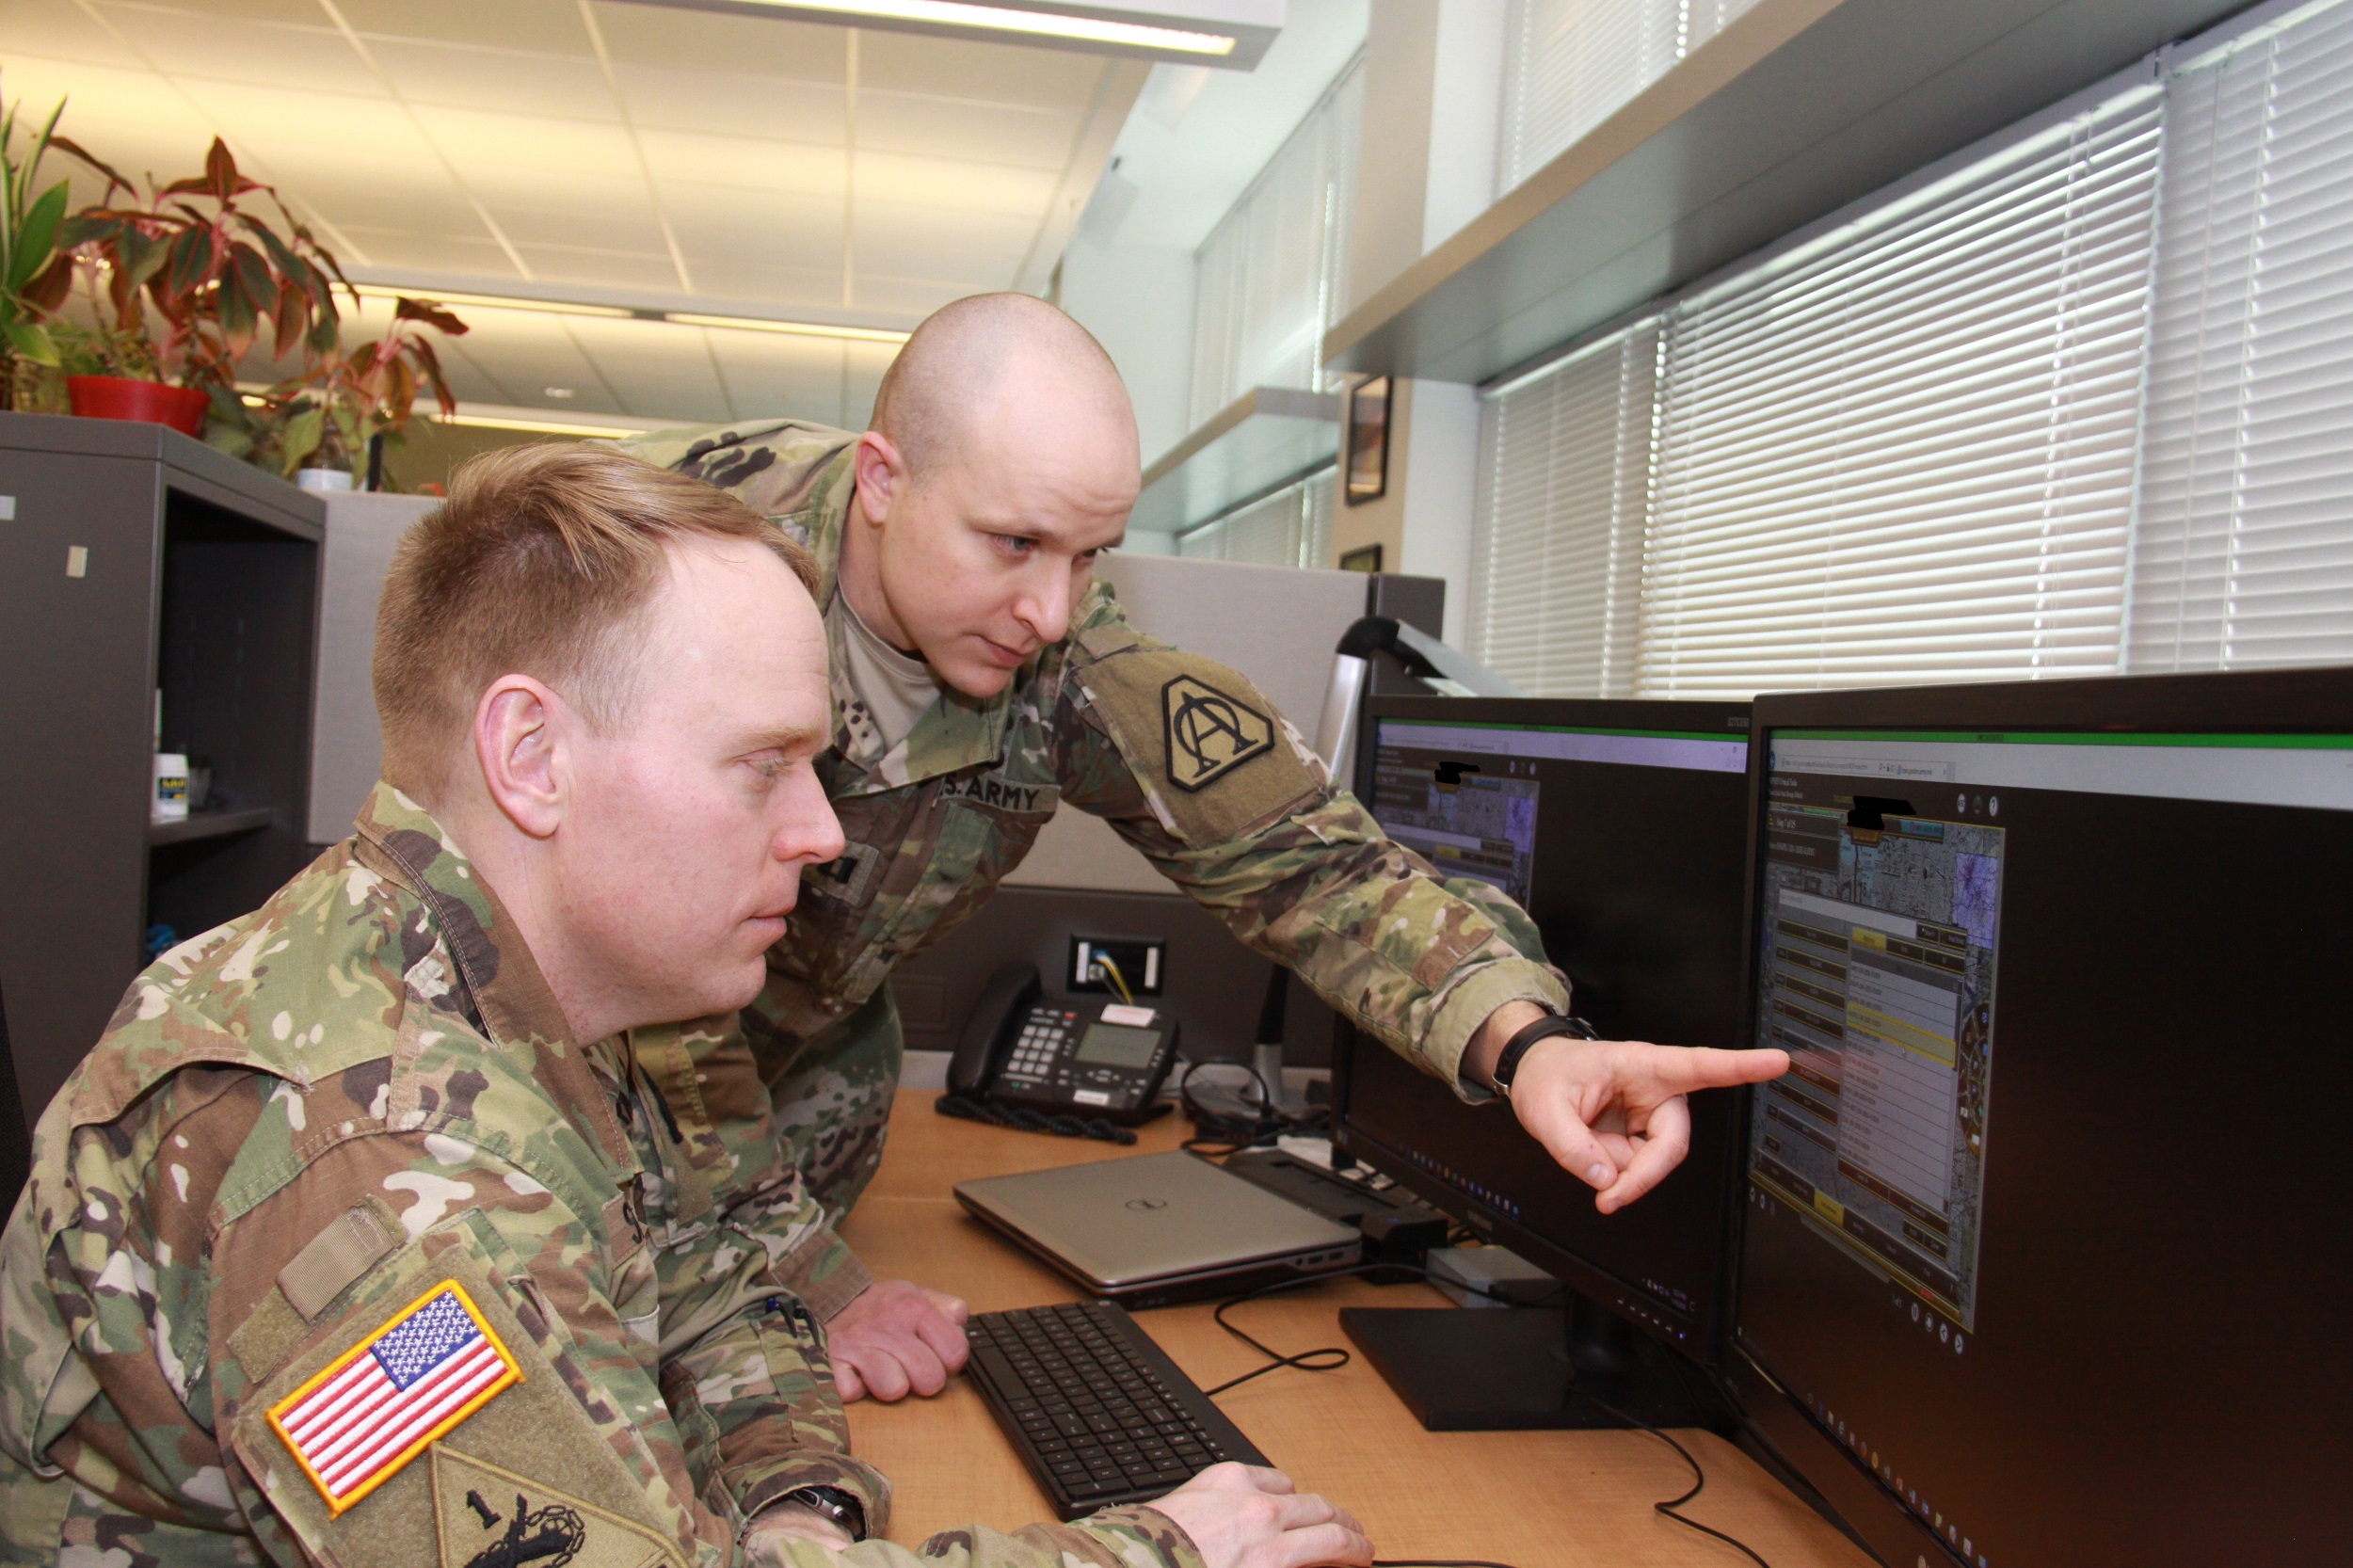 Capt. Doug Williams (standing) and Capt. Jake Singleton review the Joint Battle Command-Platform's new interactive multimedia instruction software at Aberdeen Proving Ground, Maryland, on Jan. 10, 2018. The IMI software will allow Soldiers to train on JBC-P from a CD, the Army's online training tool LandWarNet, or embedded on vehicle hardware known as Mounted Family of Computing Systems. (Photo Credit: Dan Lafontaine, PEO C3T Public Affairs)